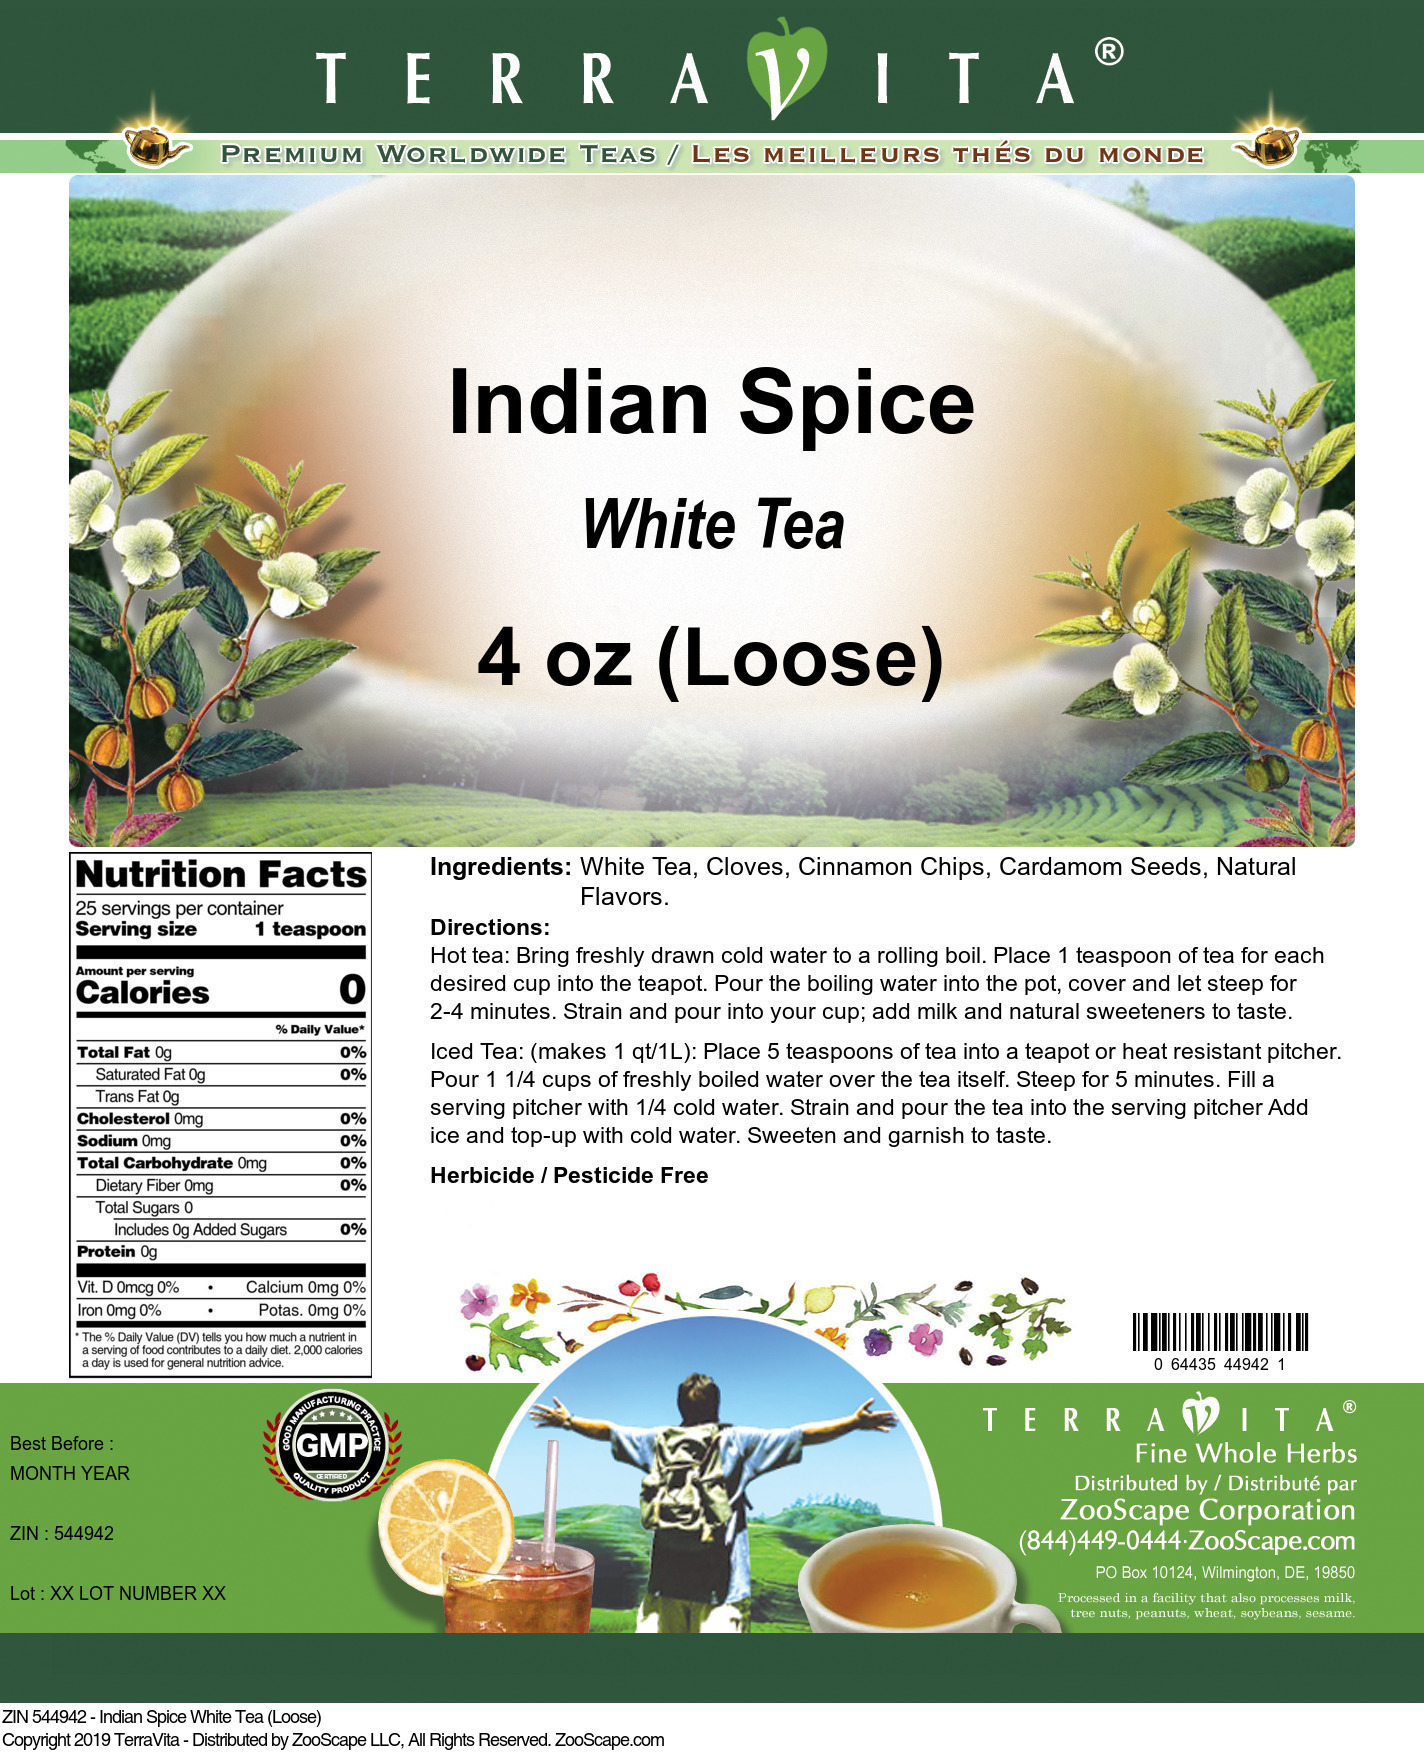 Indian Spice White Tea (Loose) - Label